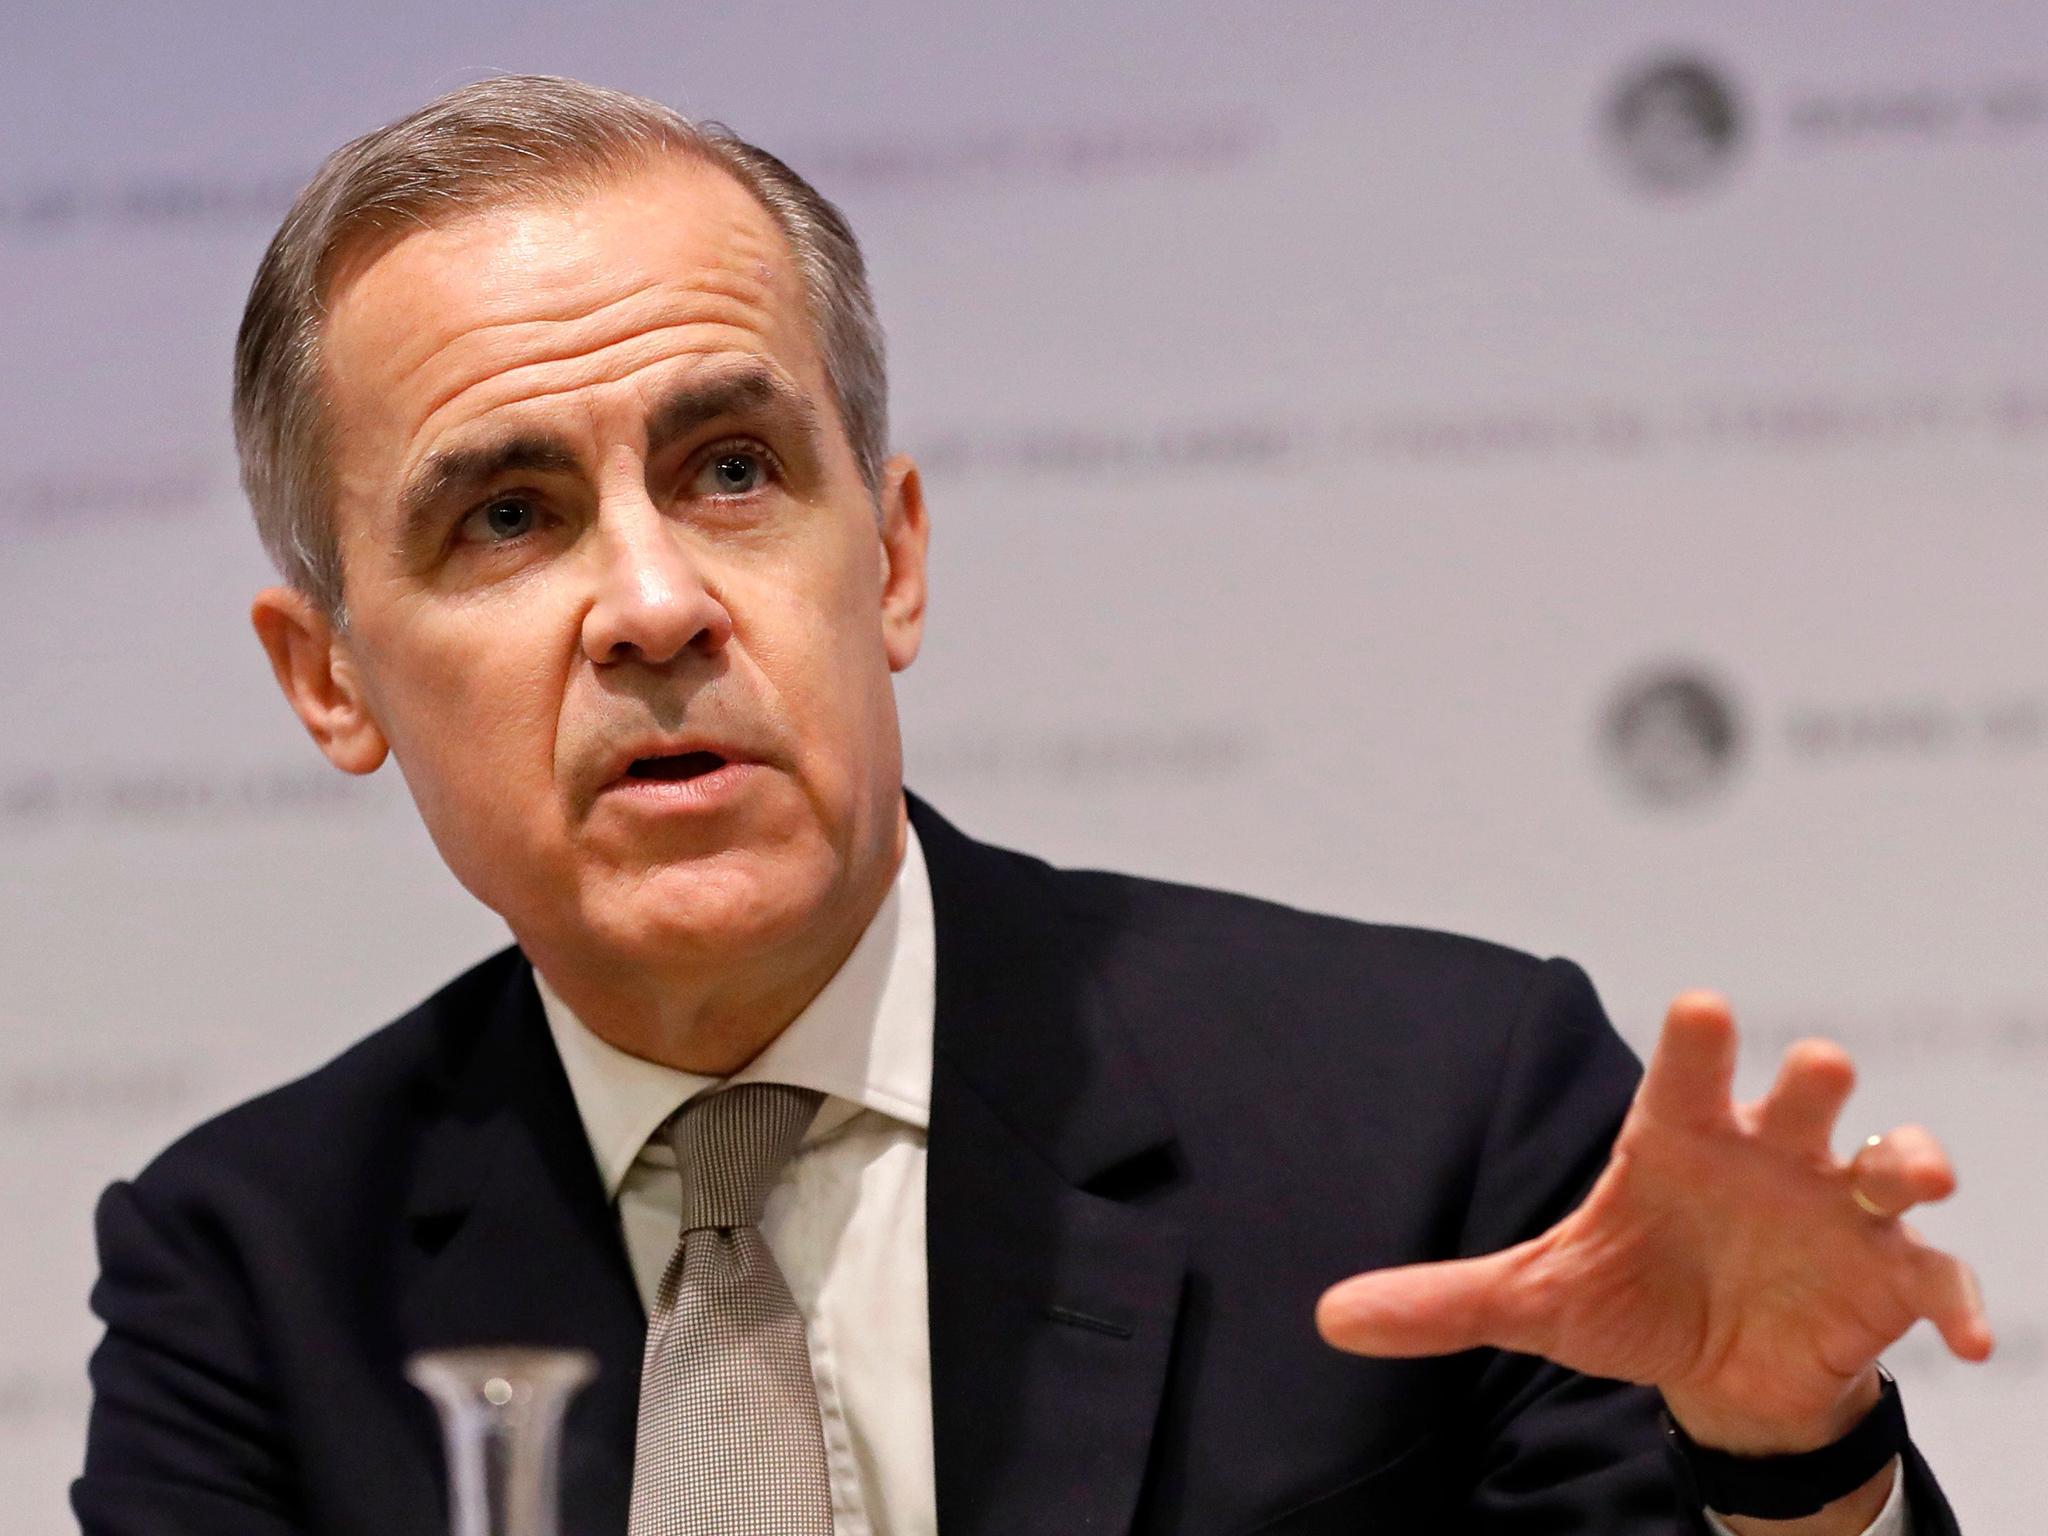 Mark Carney suggested the Bank could add further economic stimulus by increasing its purchases of both gilts and corporate bonds